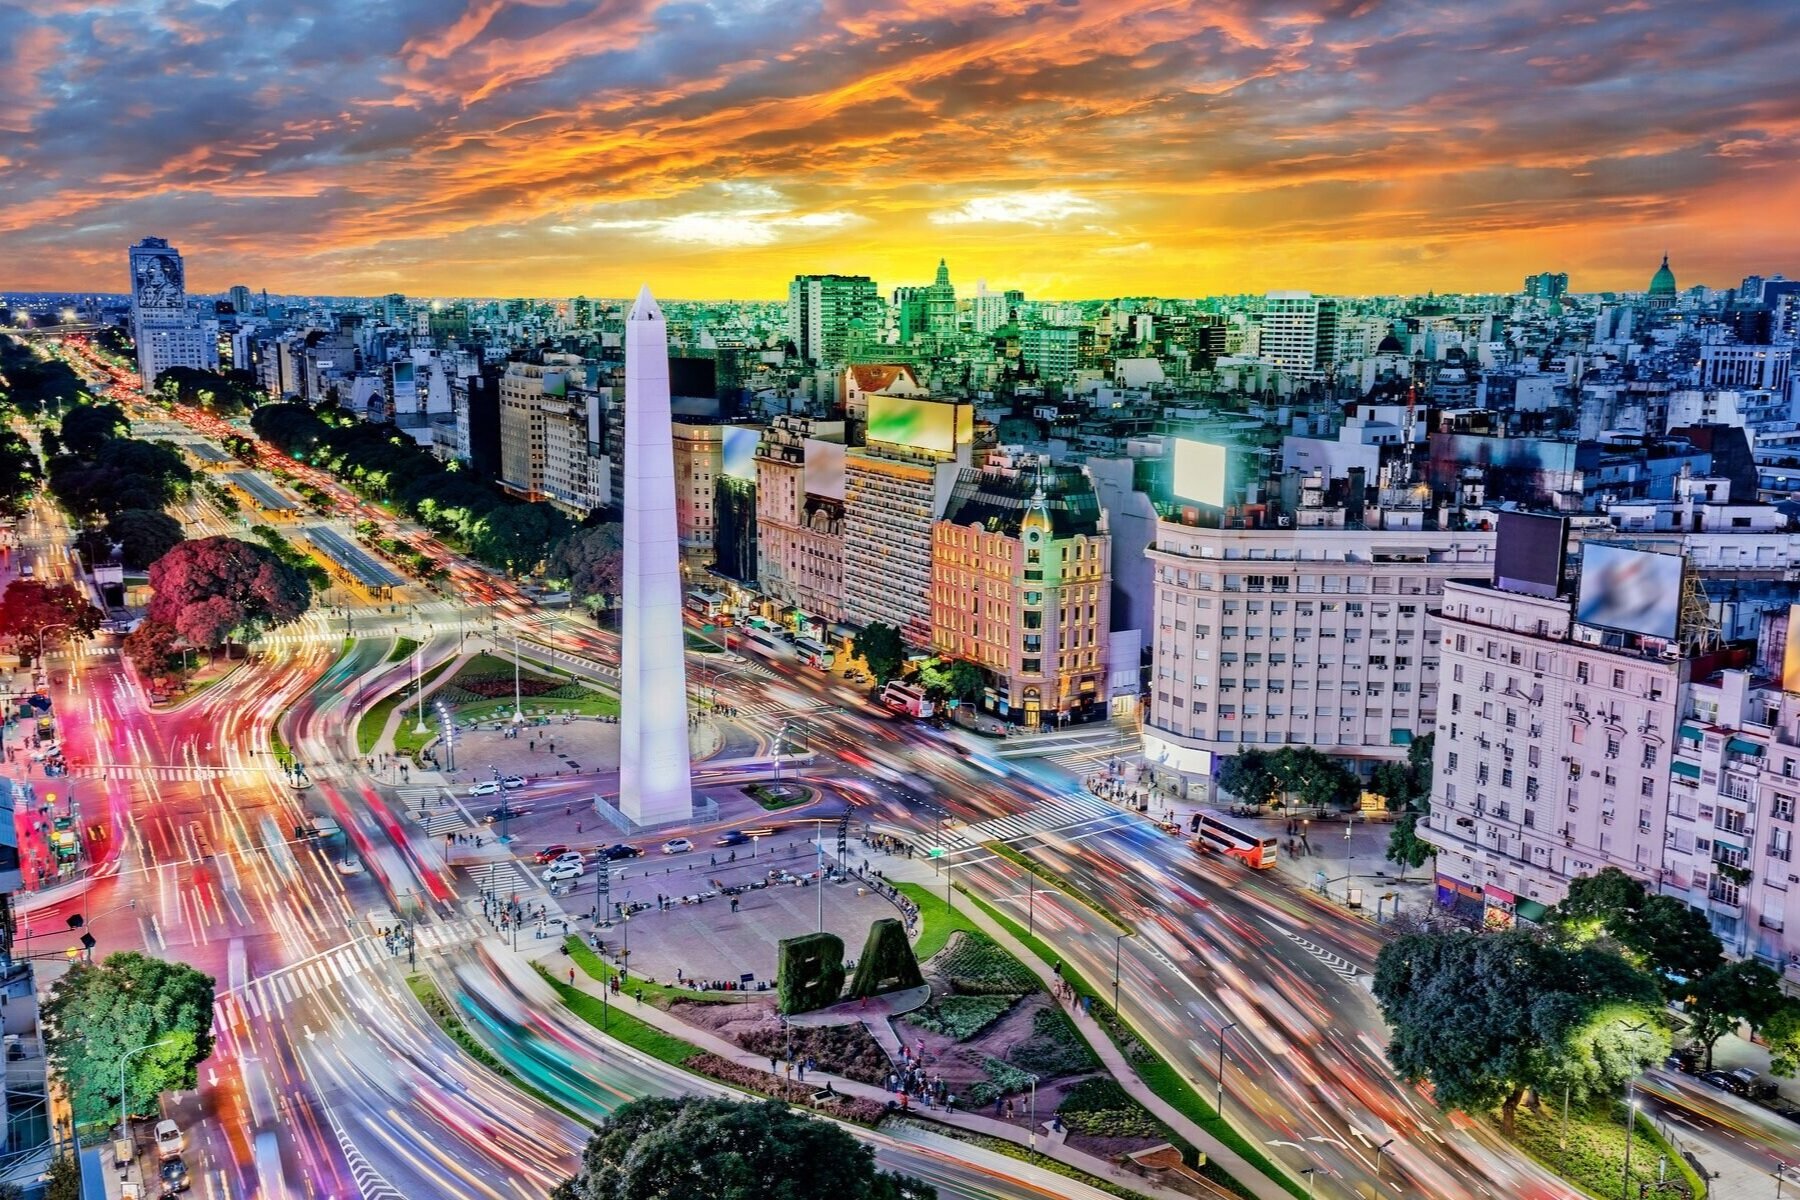 The Best of Argentina: 10 Reasons Why It’s The Single Greatest Place On Earth